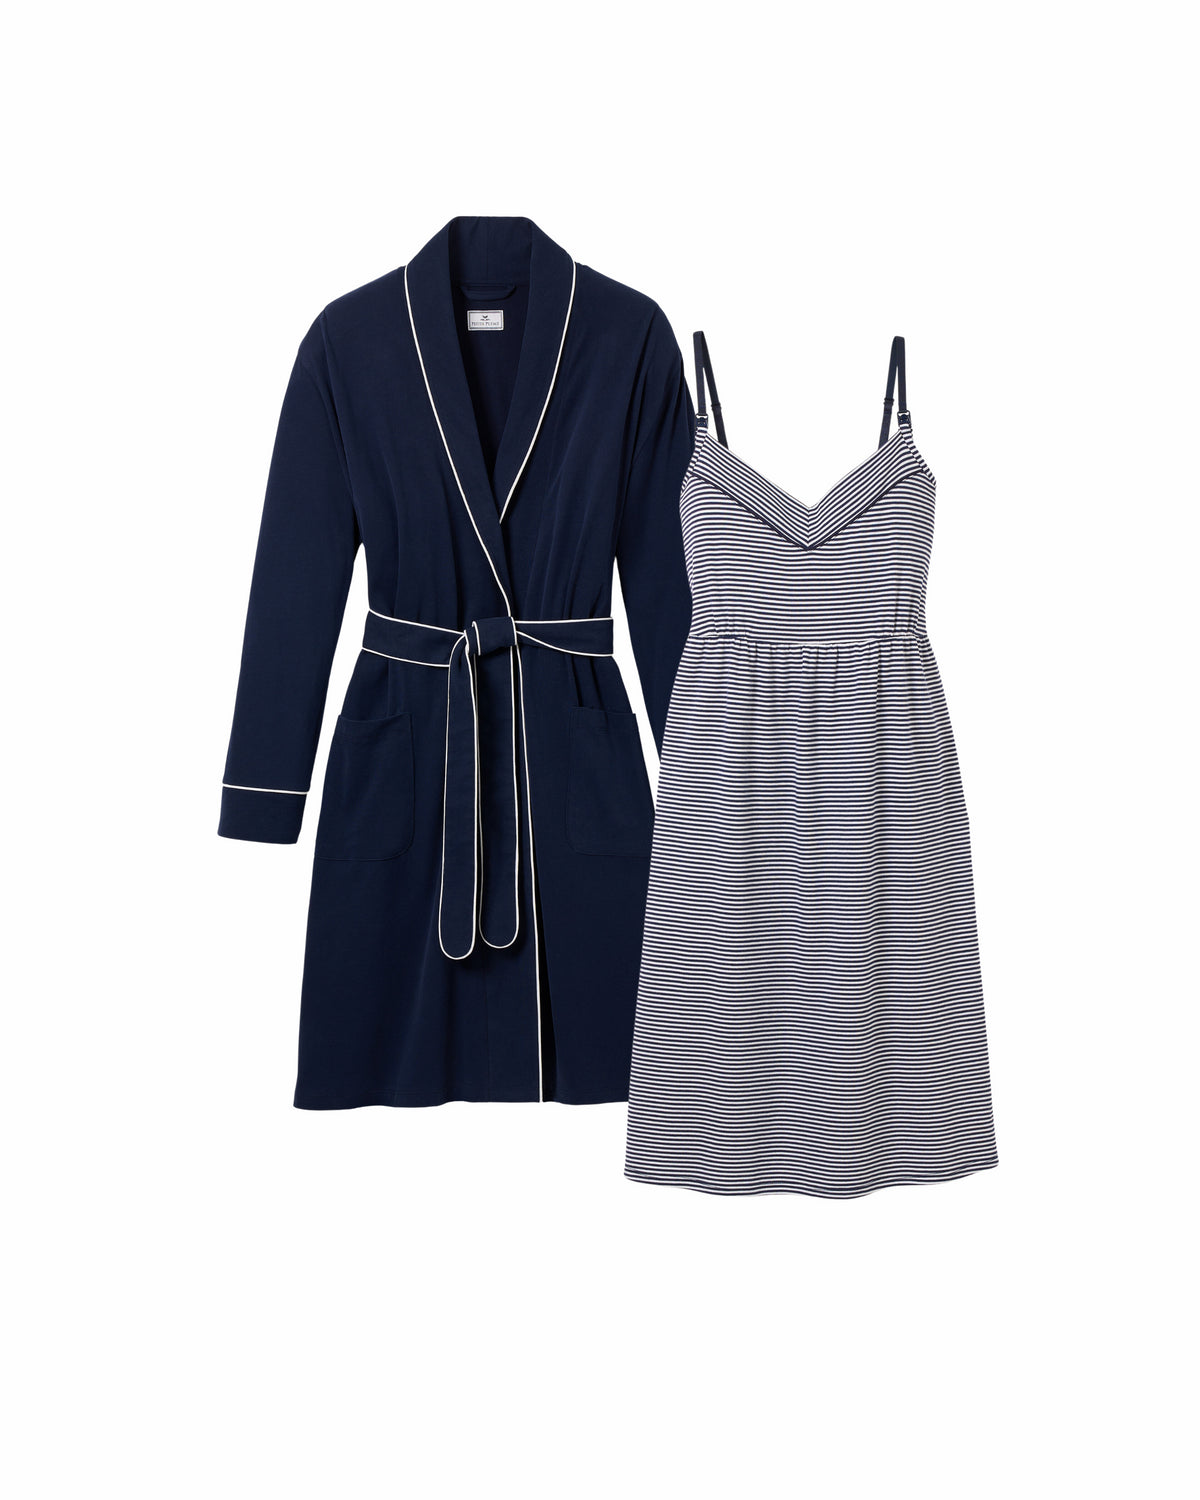 The Essential Maternity Set in Navy & Navy Stripe